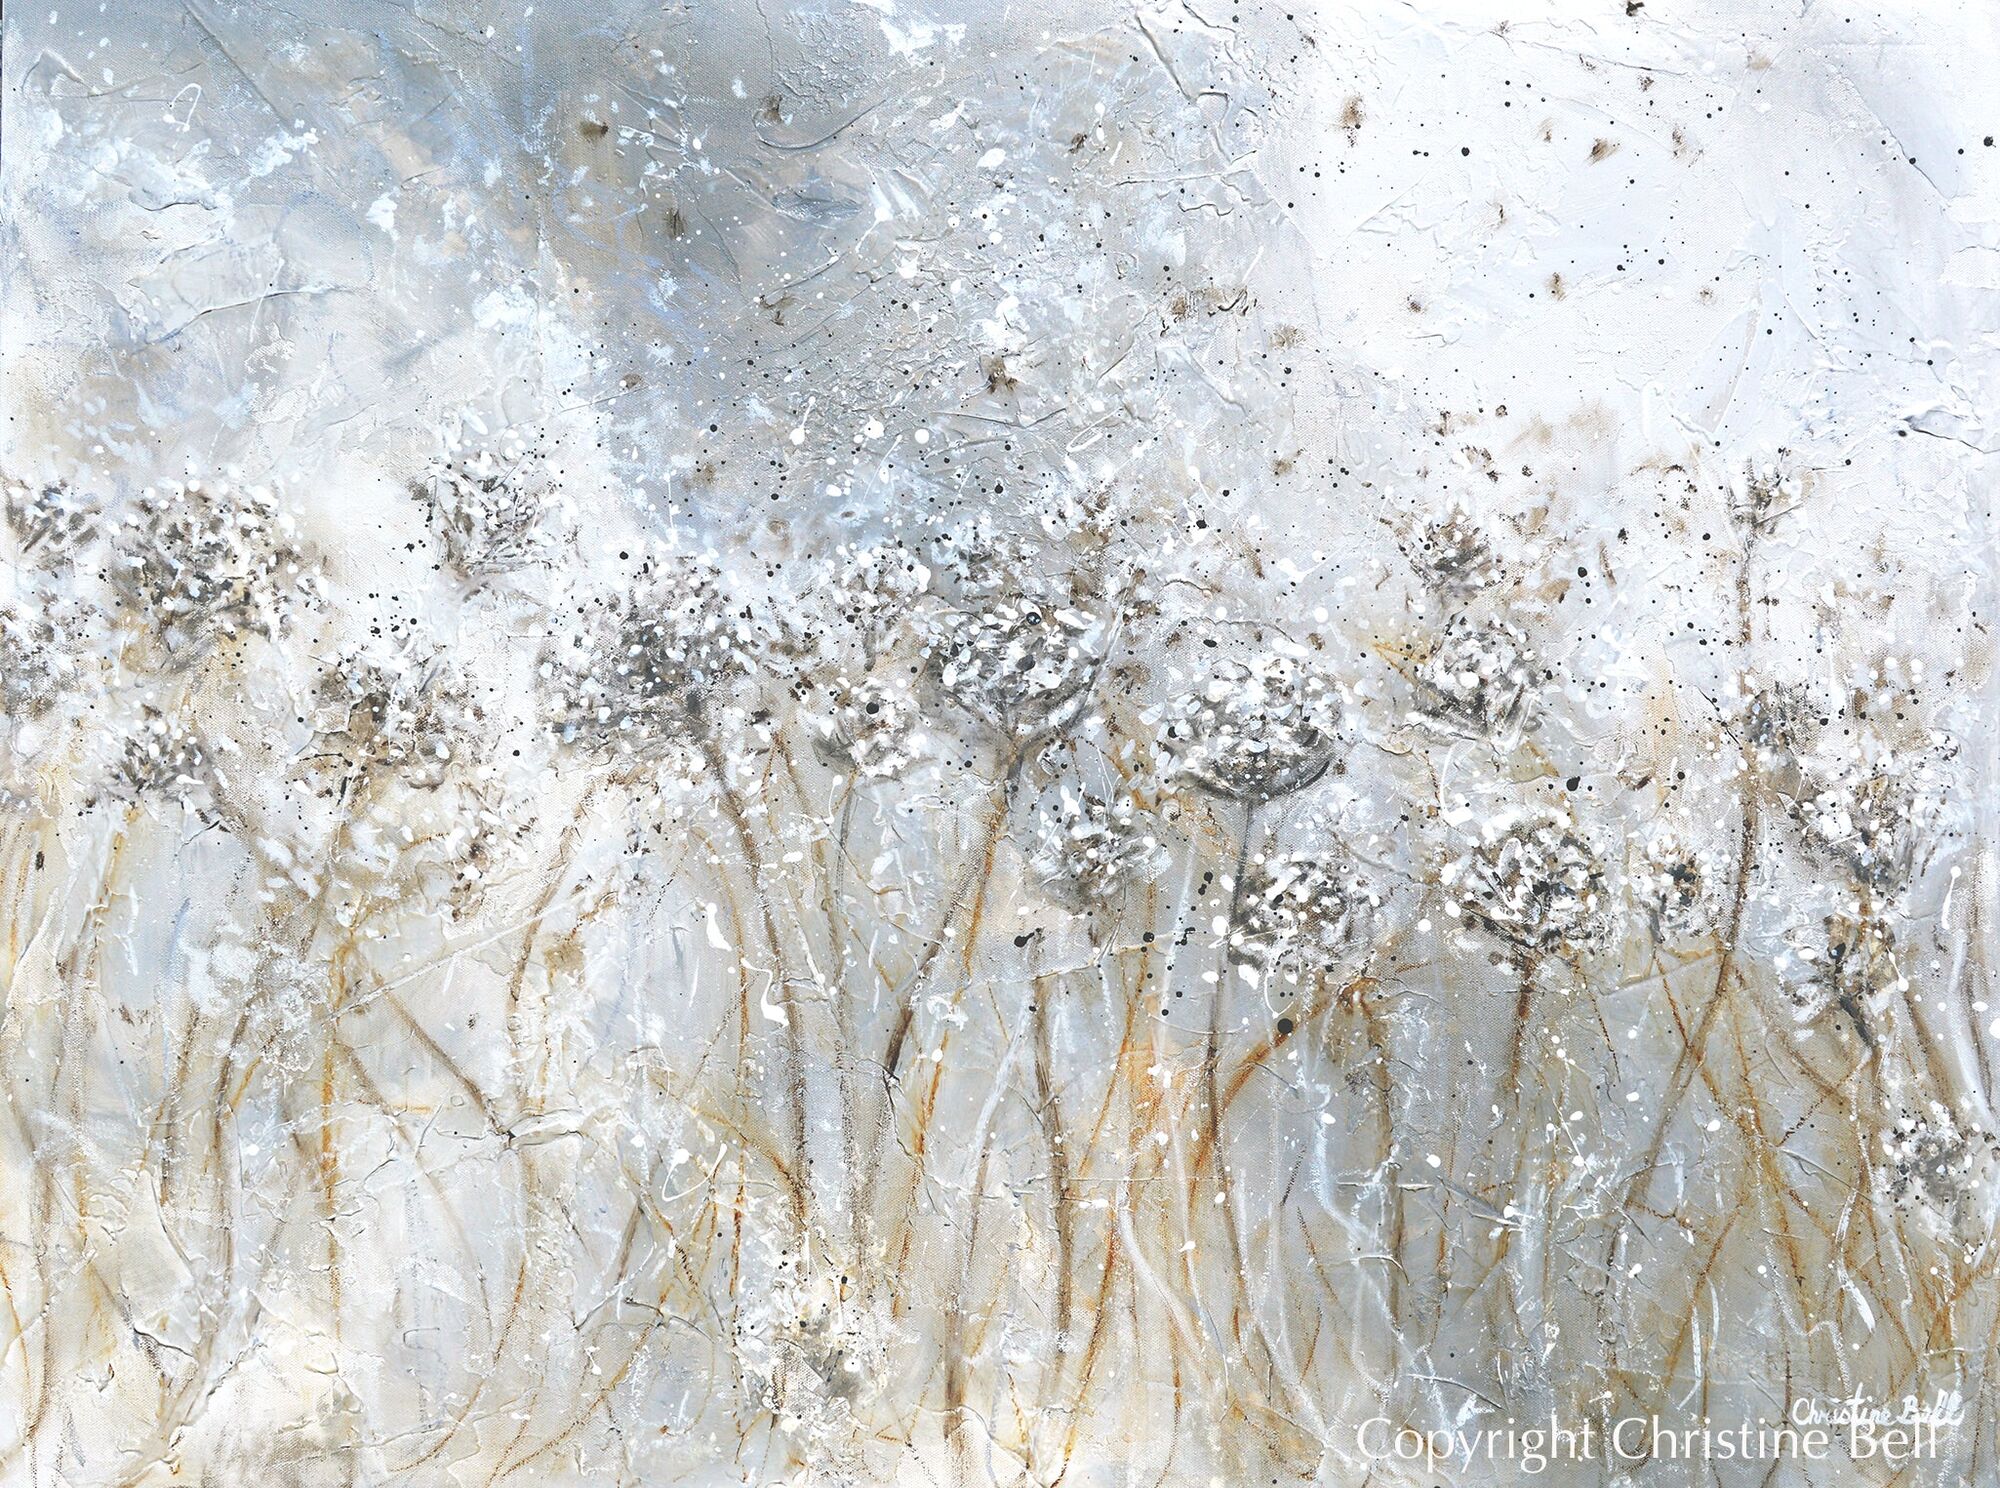 "Impressions of Lace" Giclee Print - Gicle Stretched Canvas Print / 20x15inches (51x38cm)